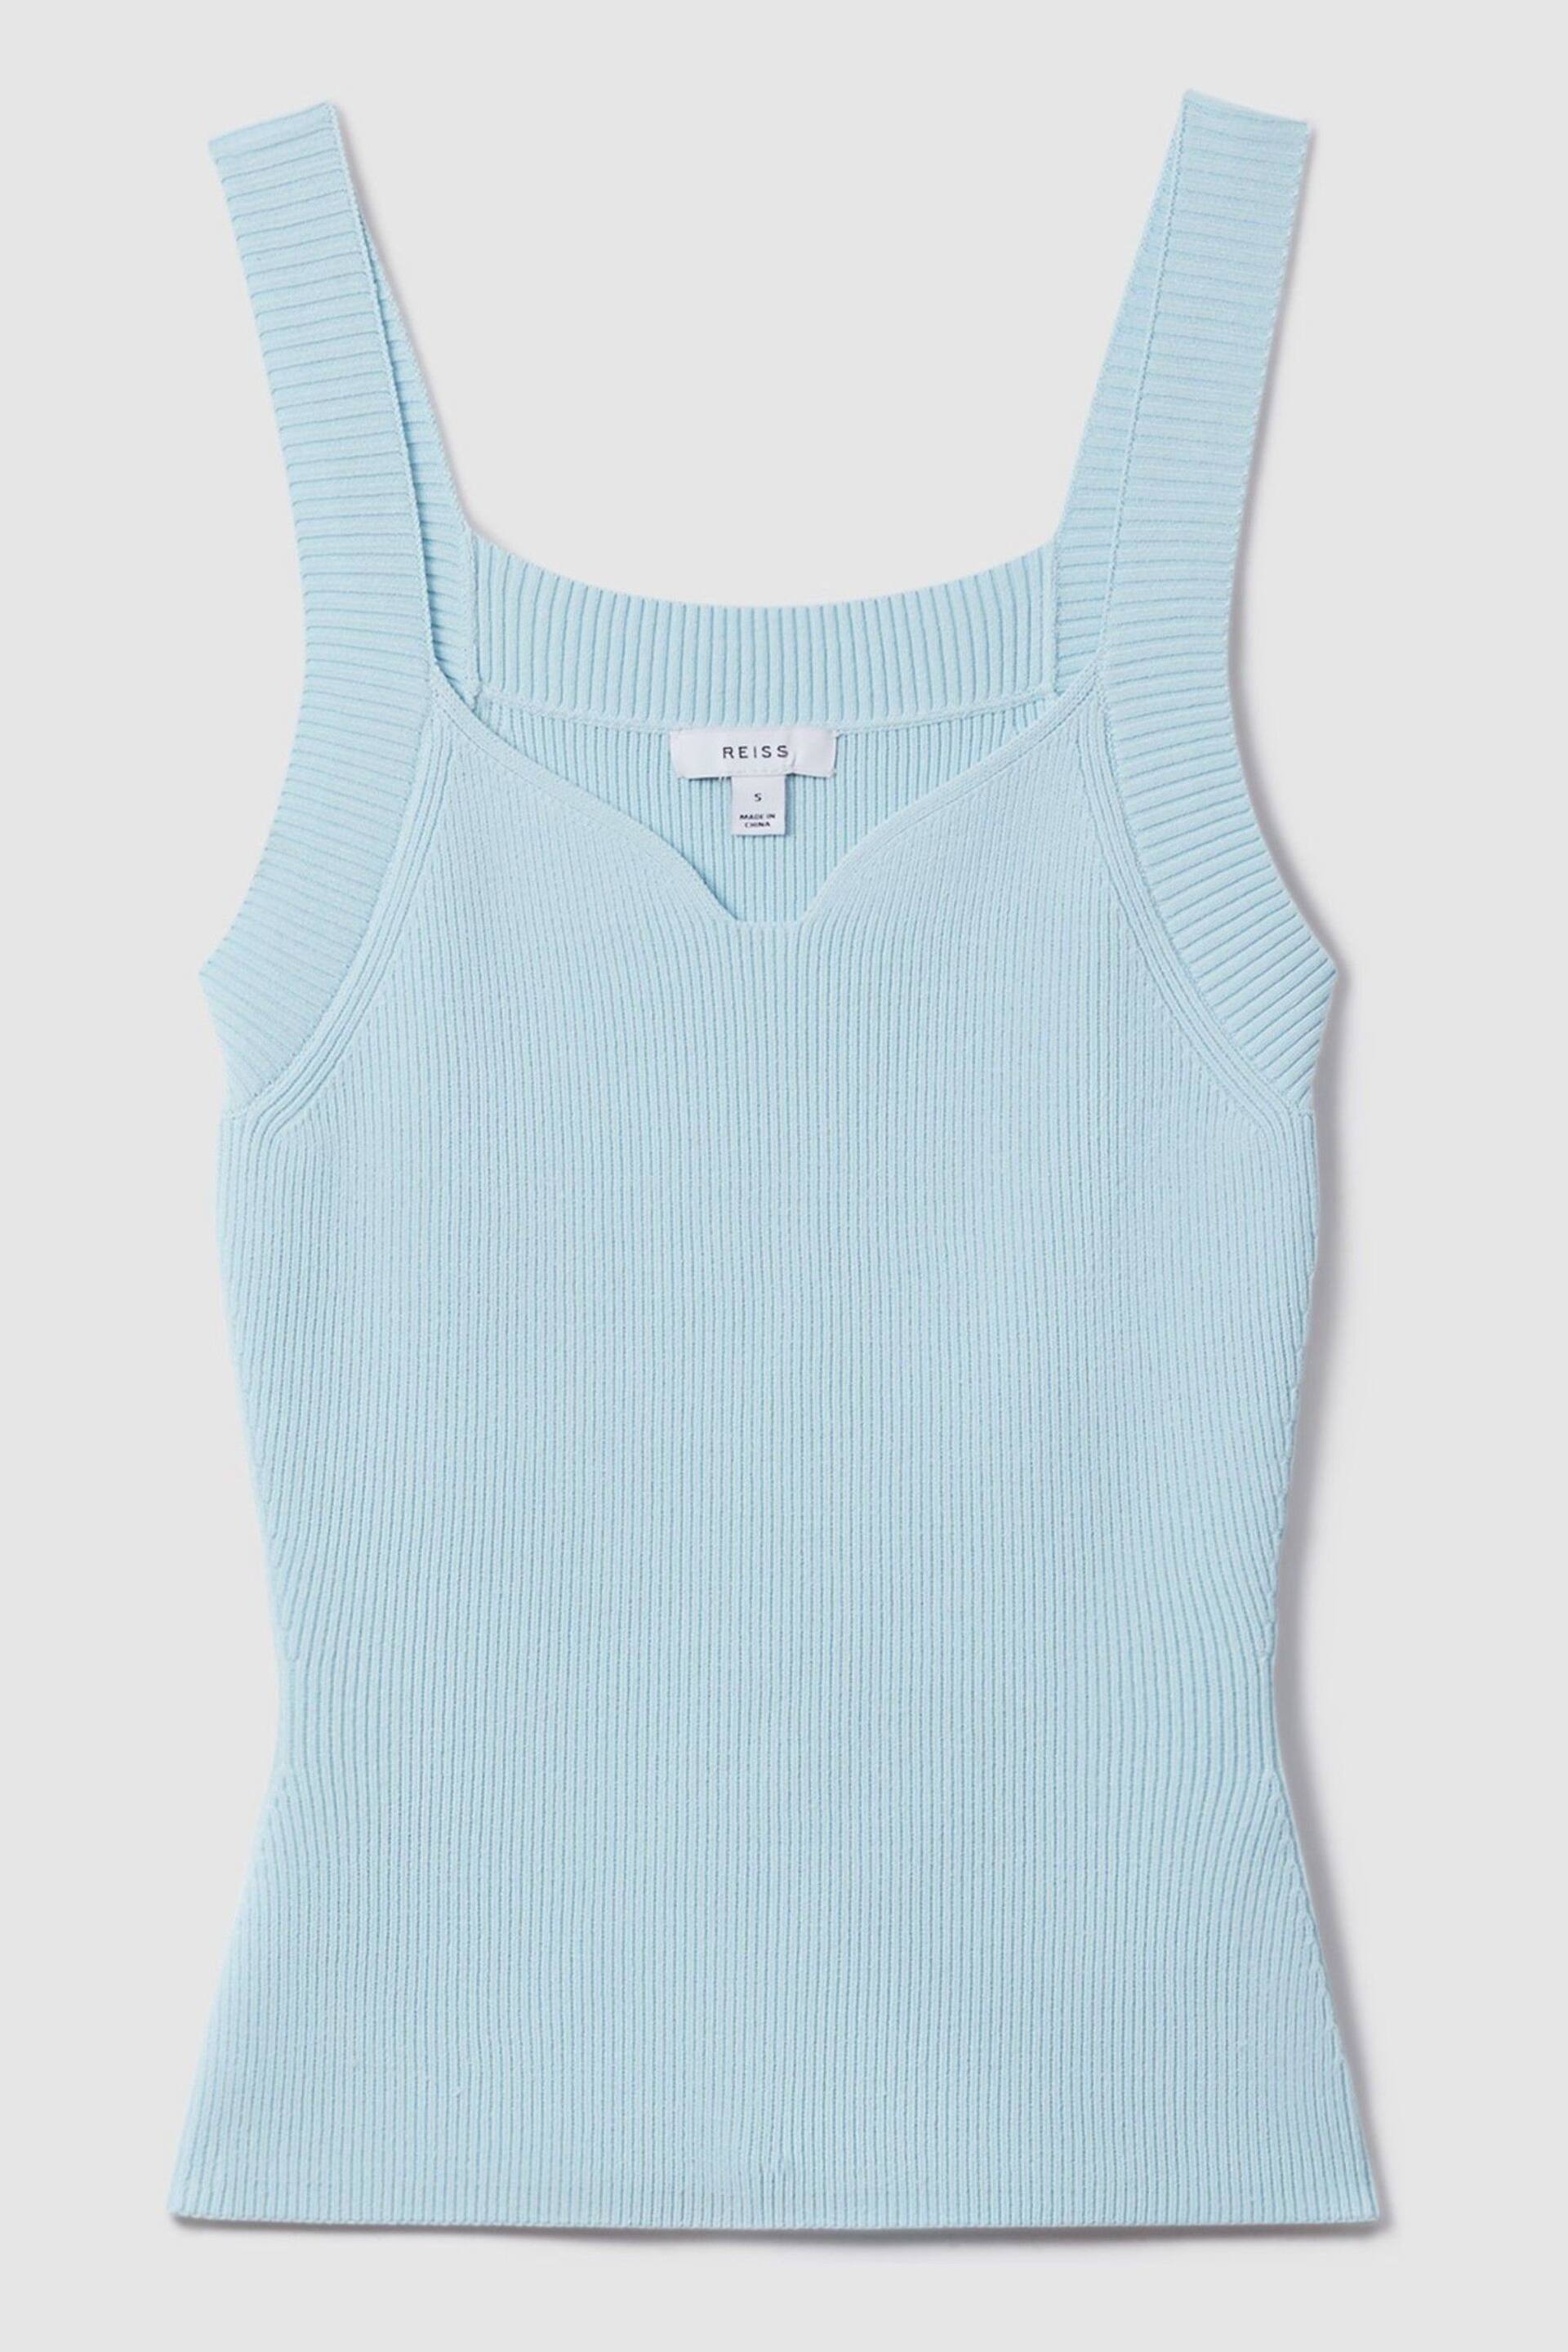 Reiss Light Blue Dani Ribbed Sweetheart Neck Top - Image 2 of 6